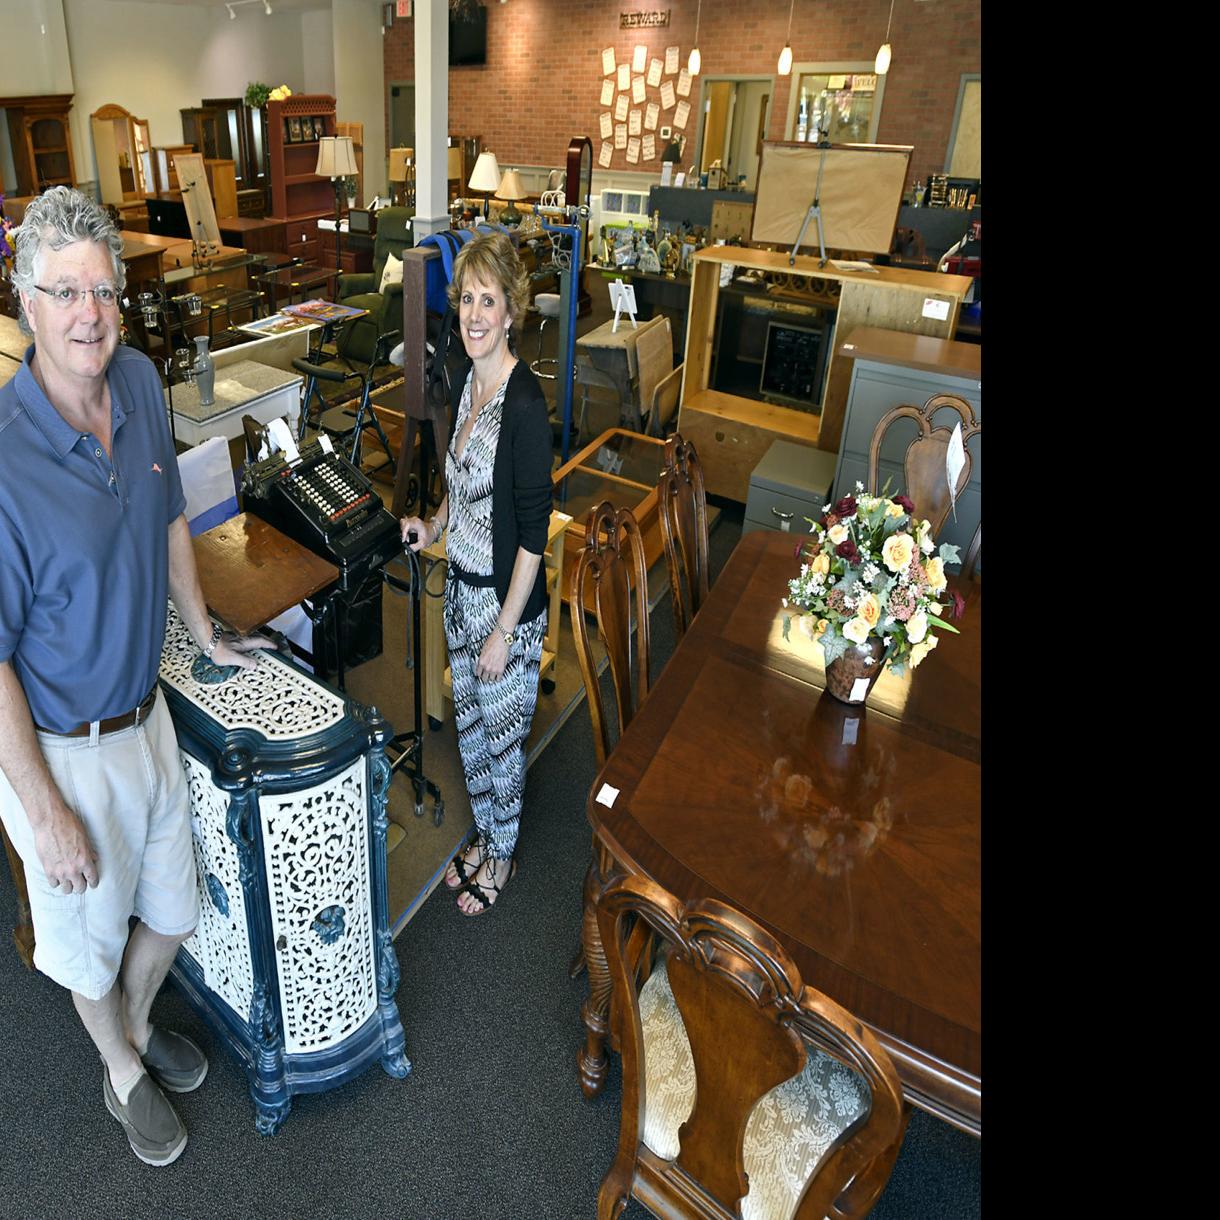 Local Couple In Late 50s Starts Retail Showroom For Used Goods